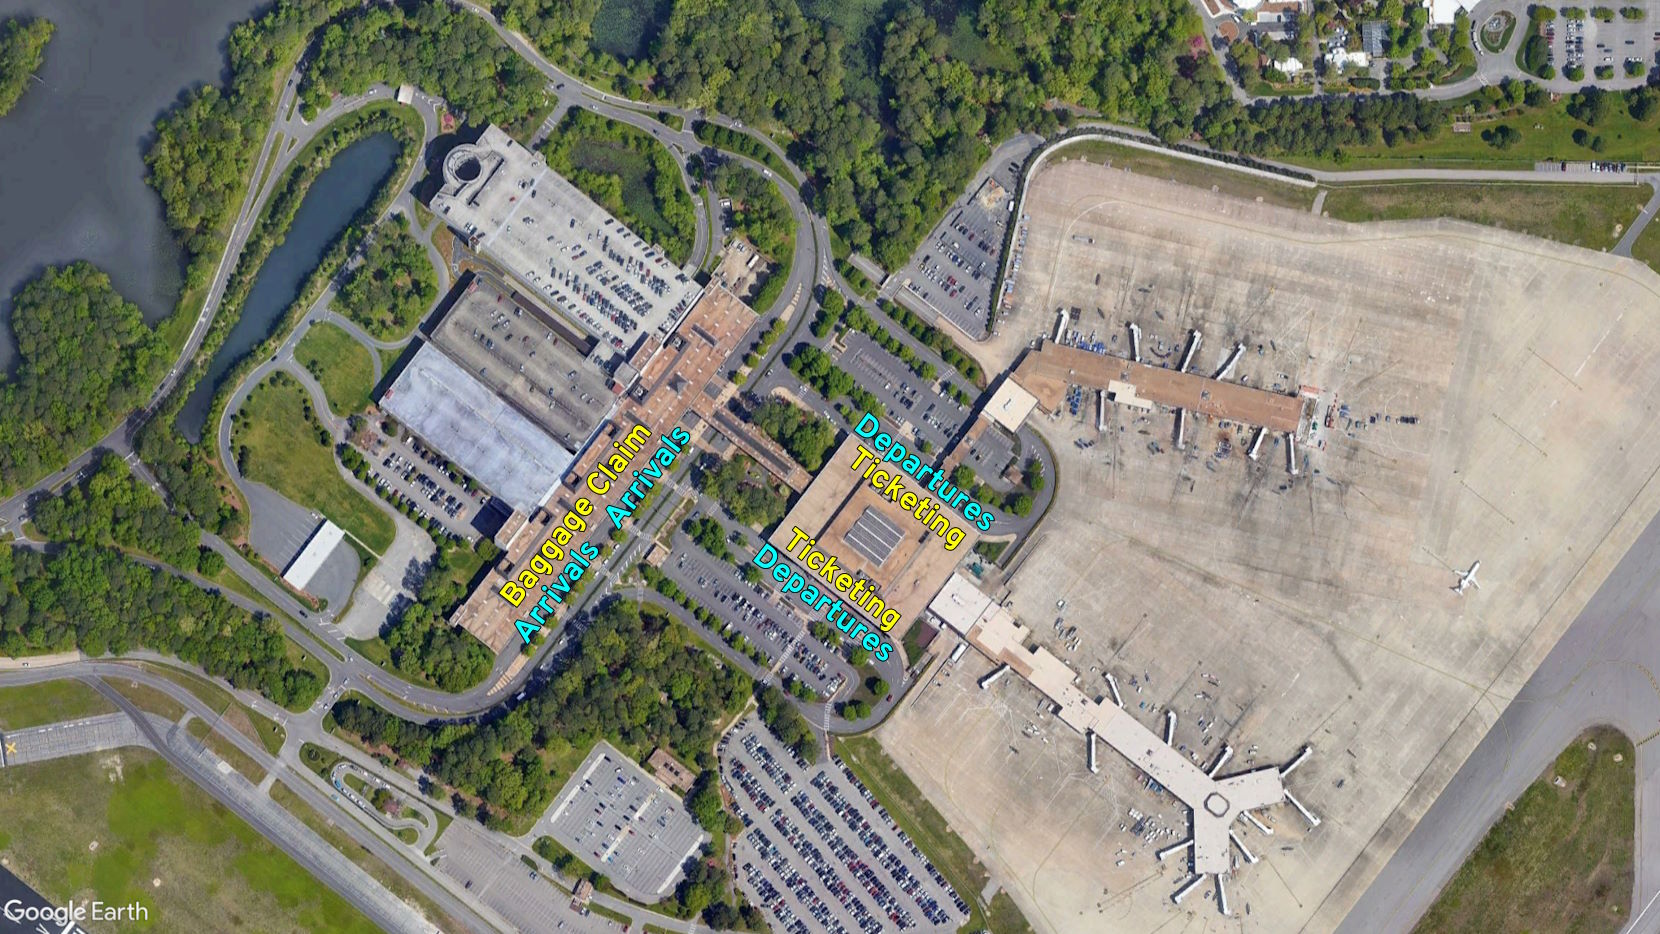 Google Earth imagery of ORF, labeling the departures, ticketing, baggage claim, and arrivals. Departures and ticketing are in one building, while baggage claim and arrivals are in another.